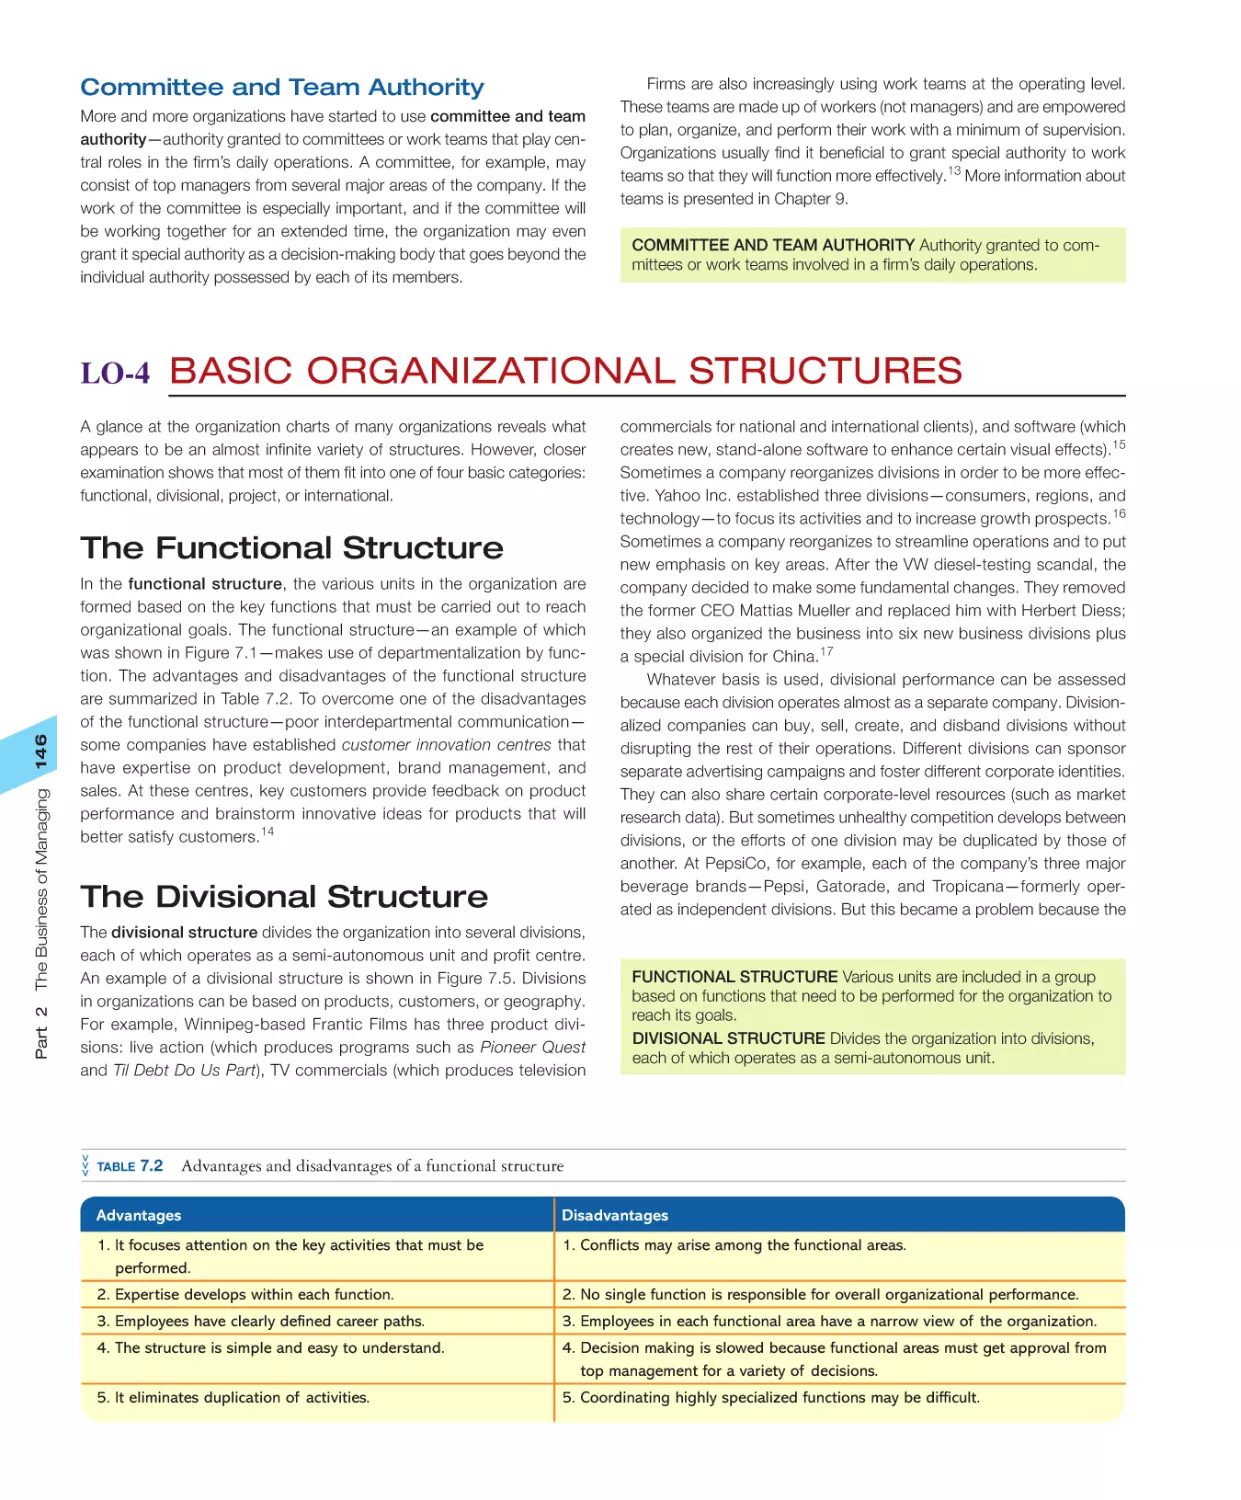 LO‐4 Basic Organizational Structures
The Divisional Structure